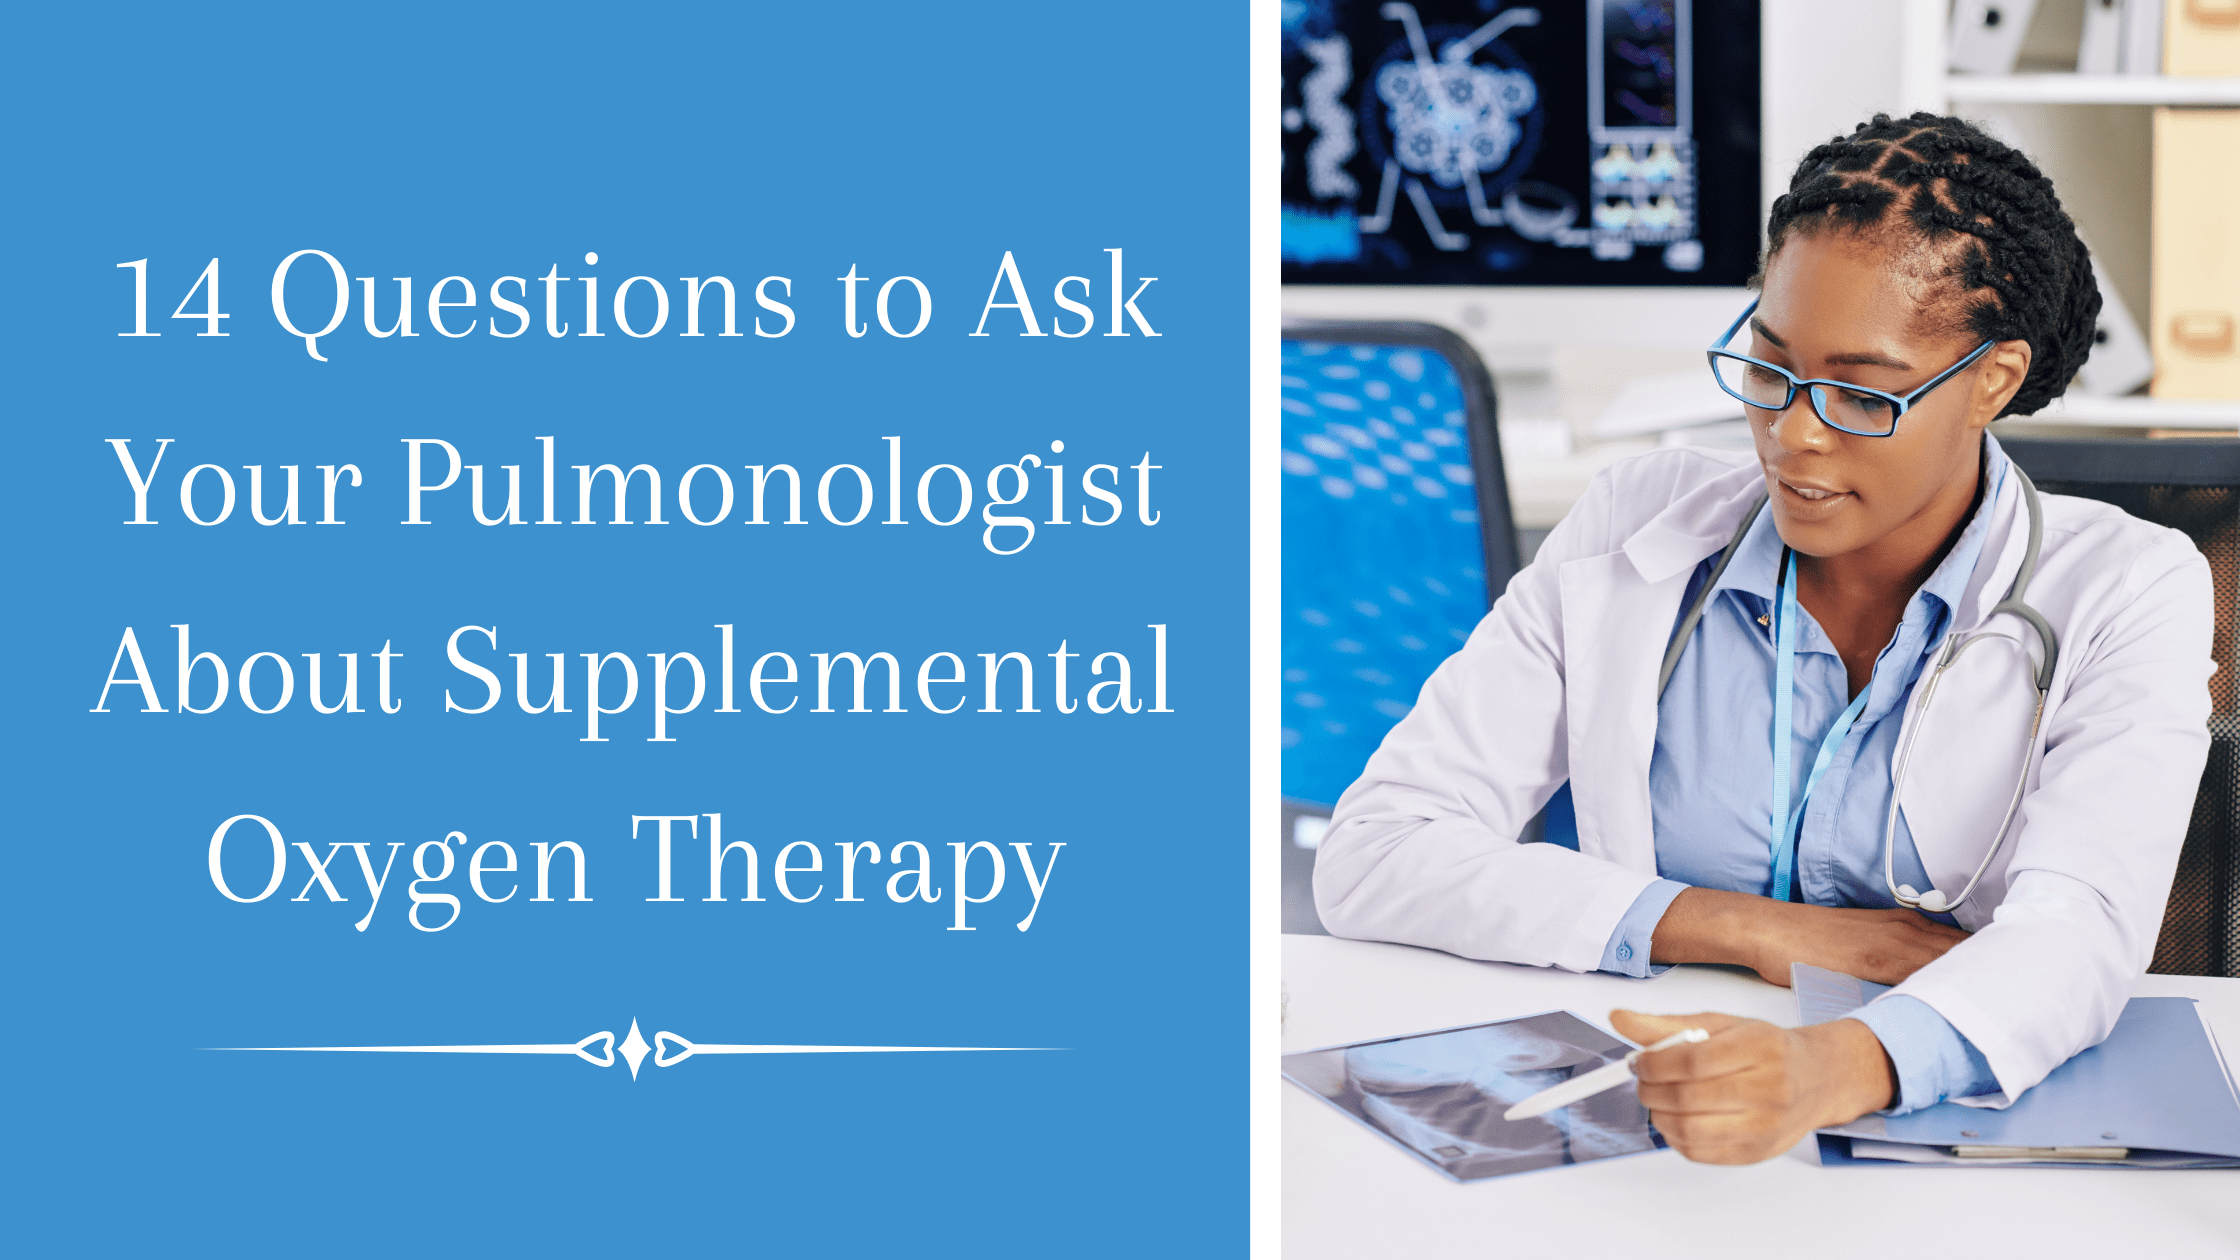 14 Questions to Ask Your Pulmonologist About Supplemental Oxygen Therapy